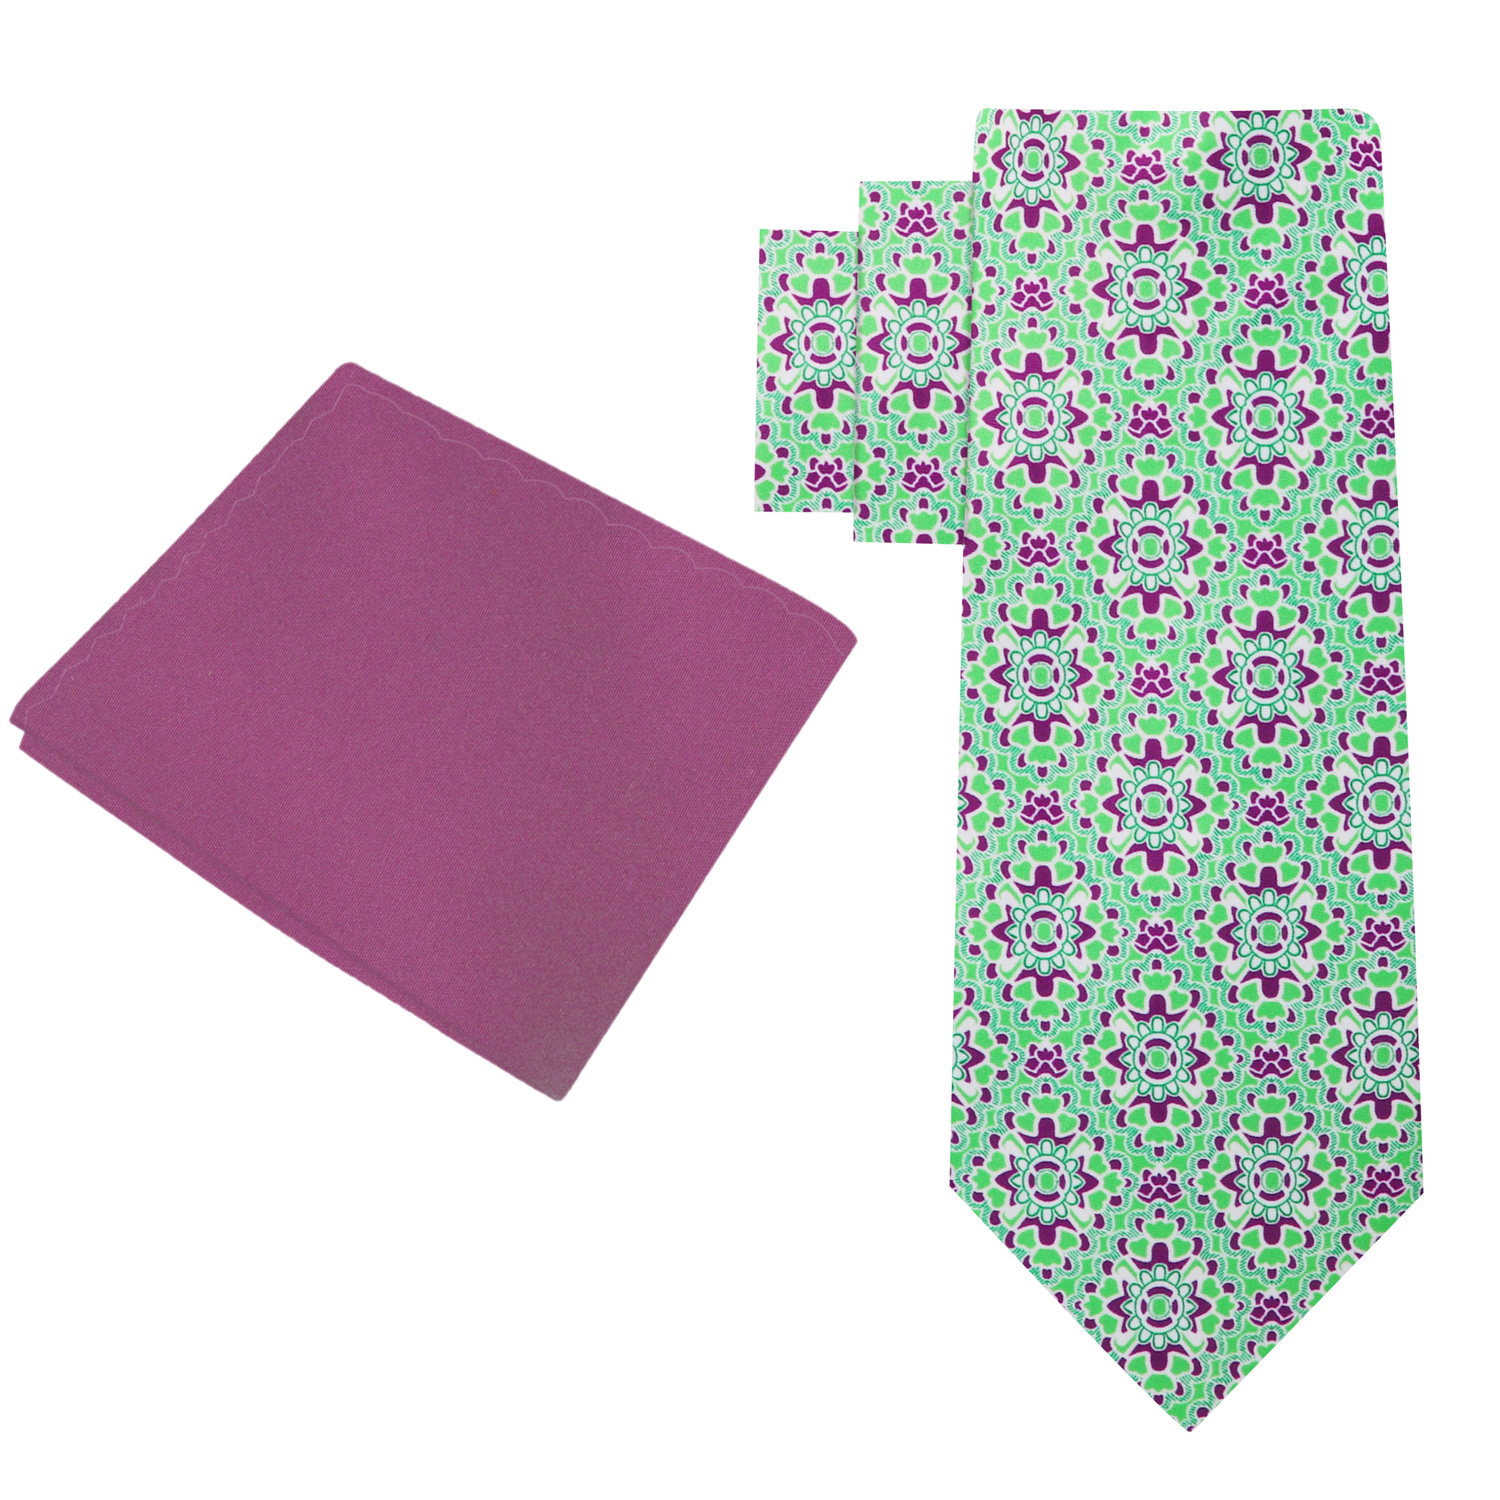 Alt View: Green, White, Wine Mosaic Abstract Necktie and Wine Square